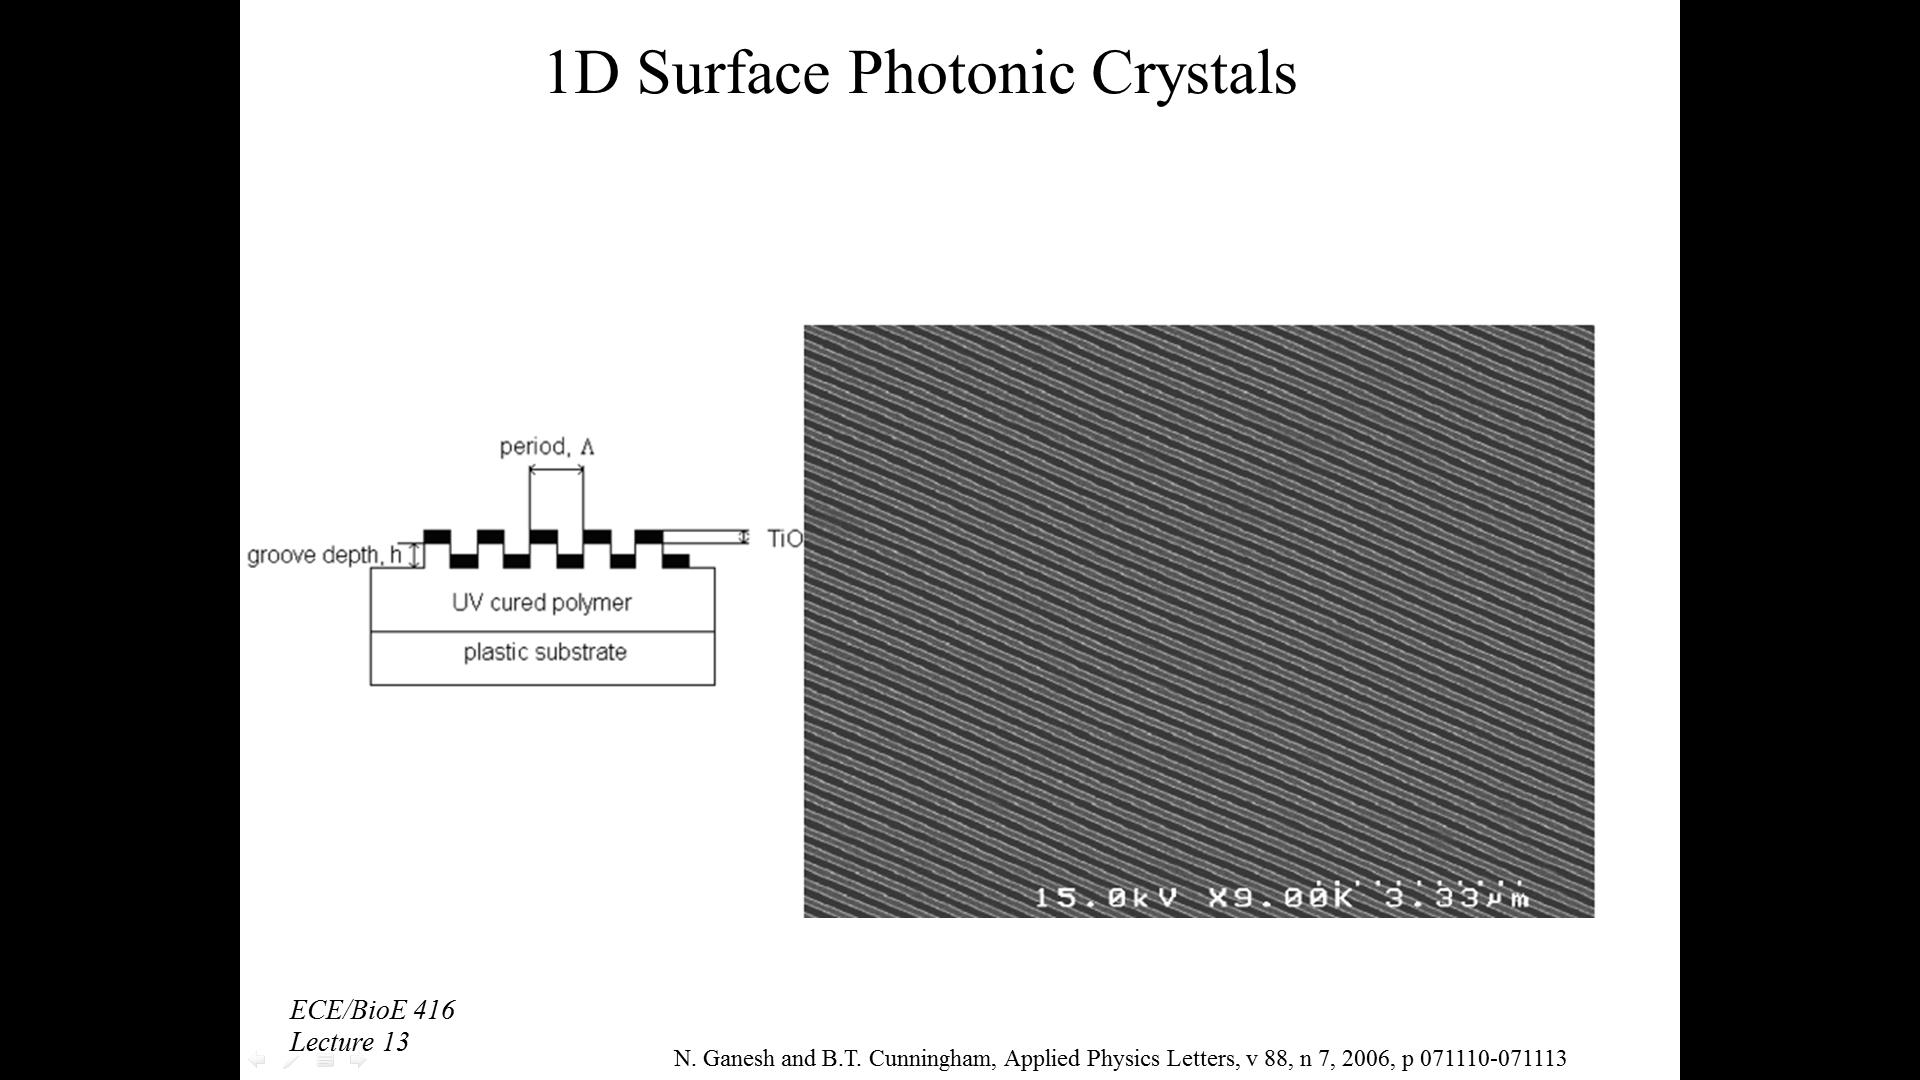 1D Surface Photonic Crystals